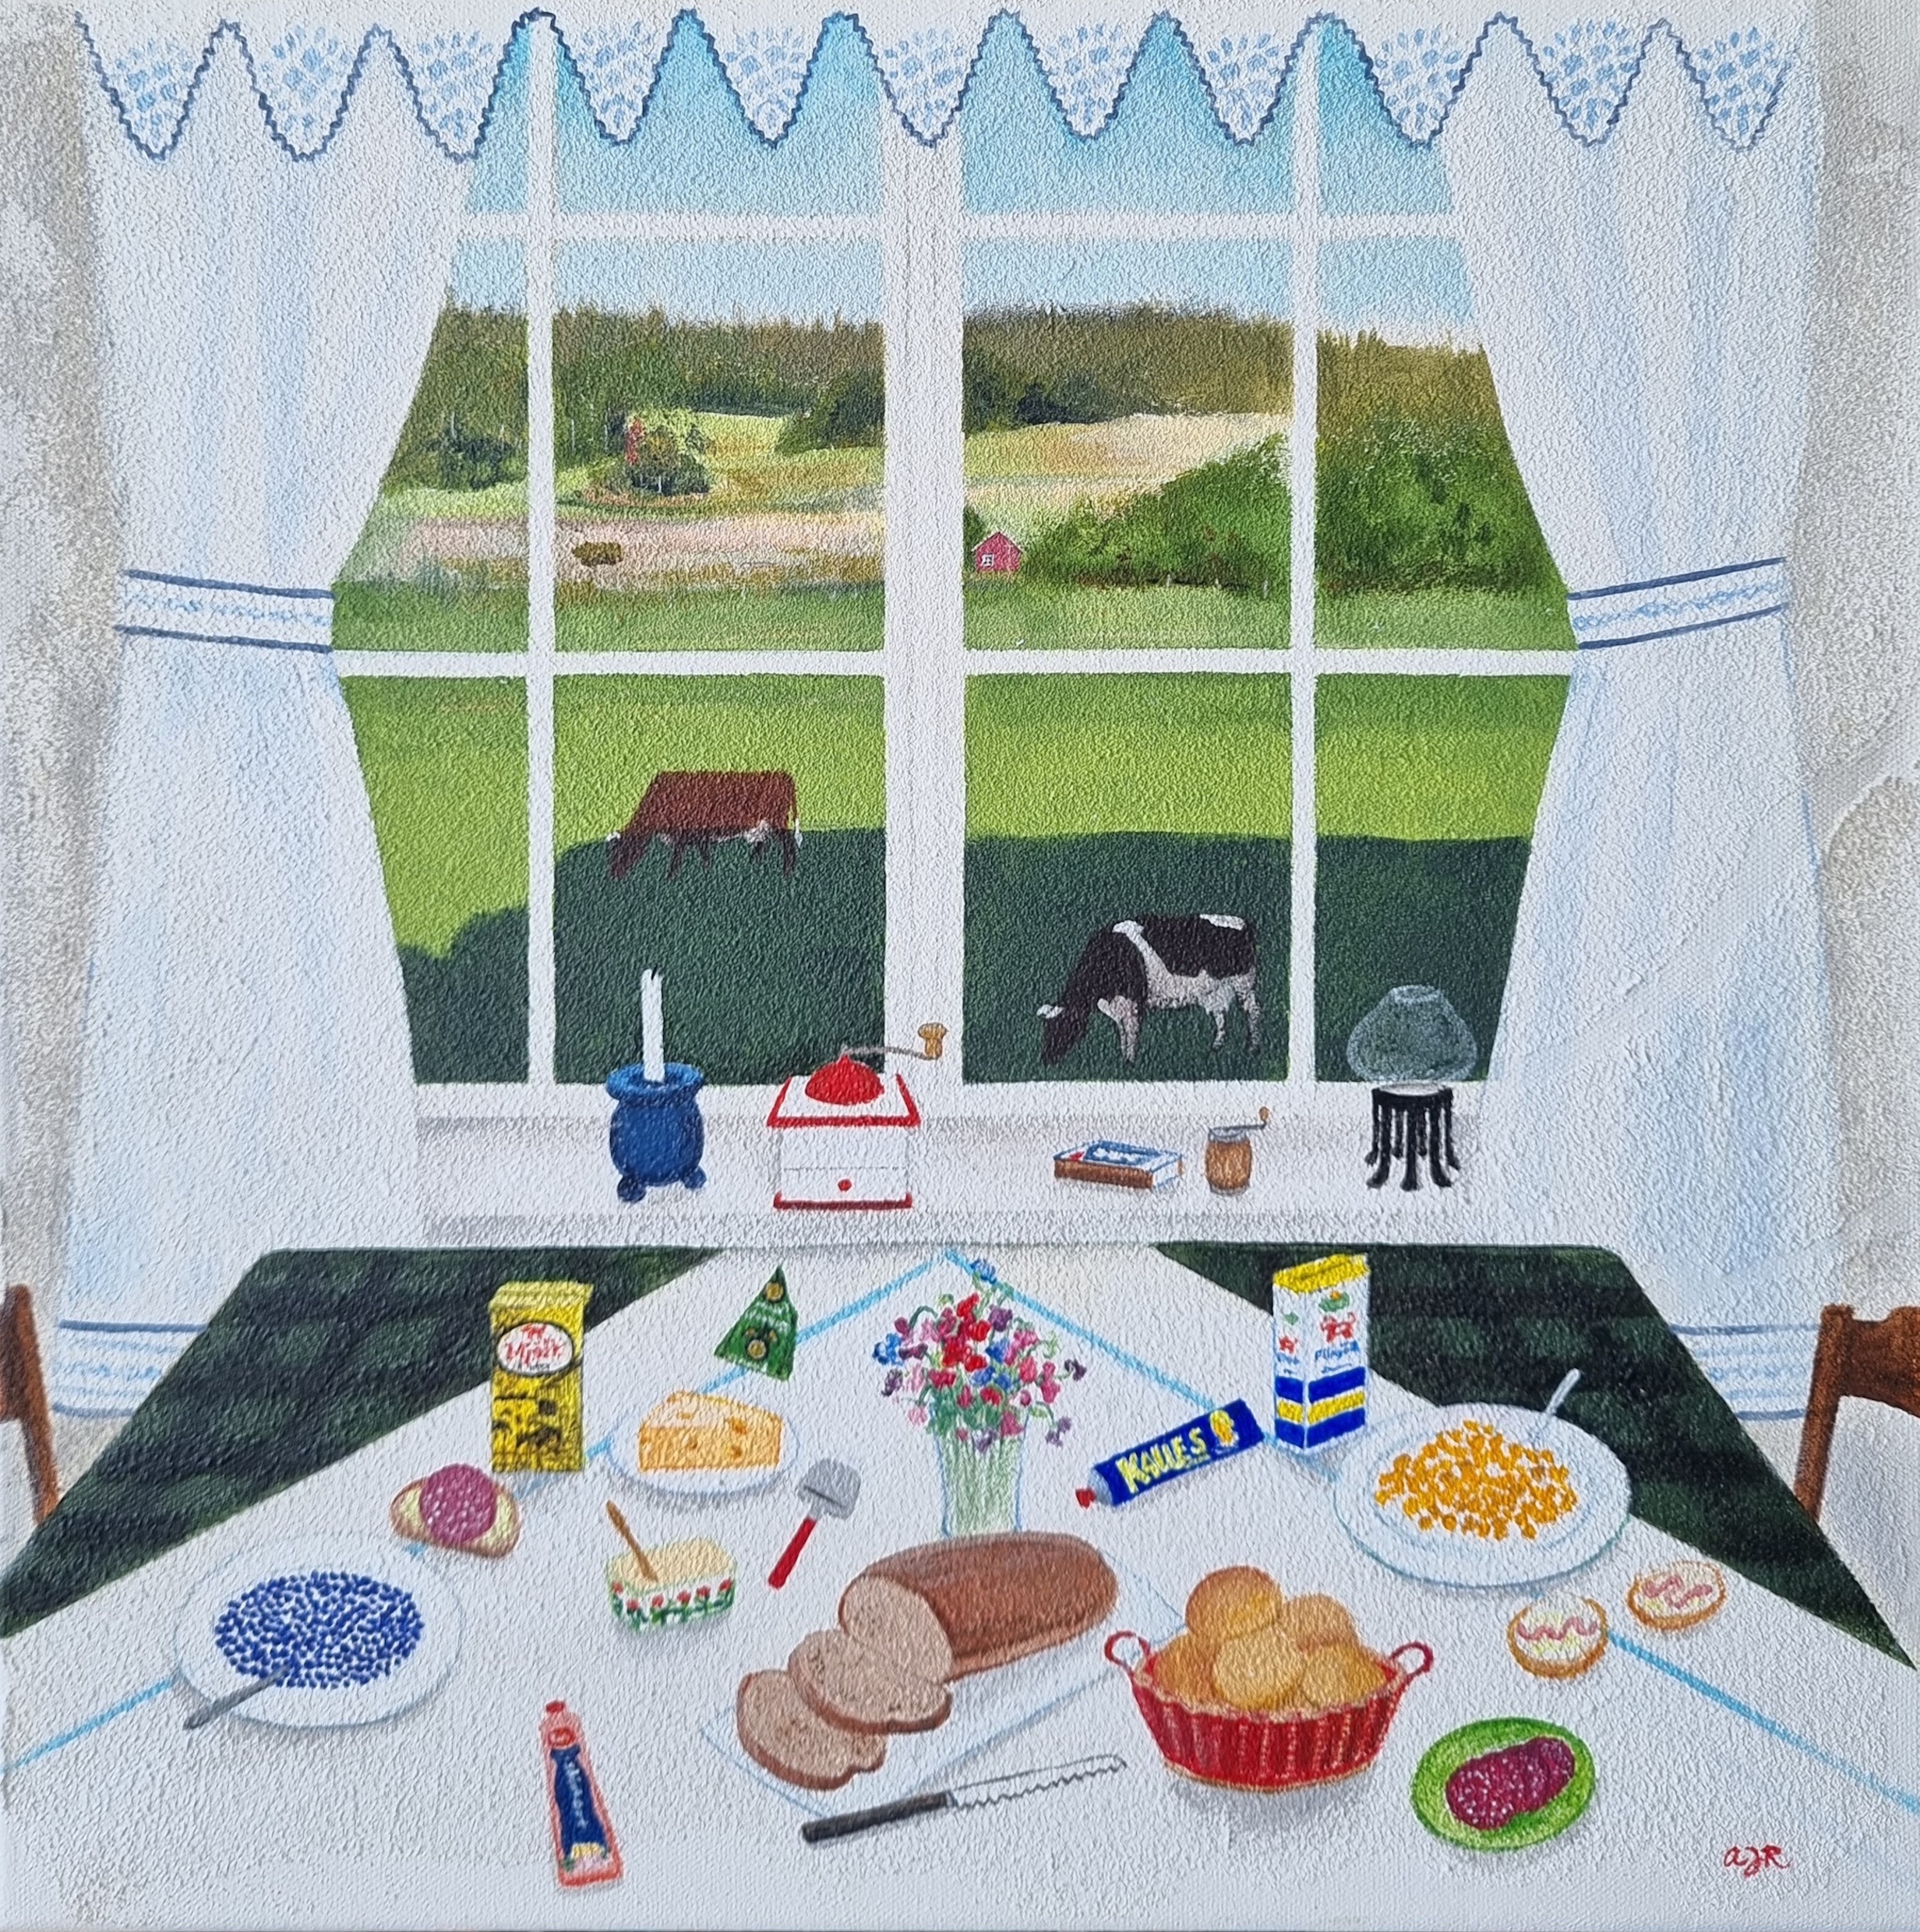 Lunch with a view, painting by Anna Jogefalt Racz